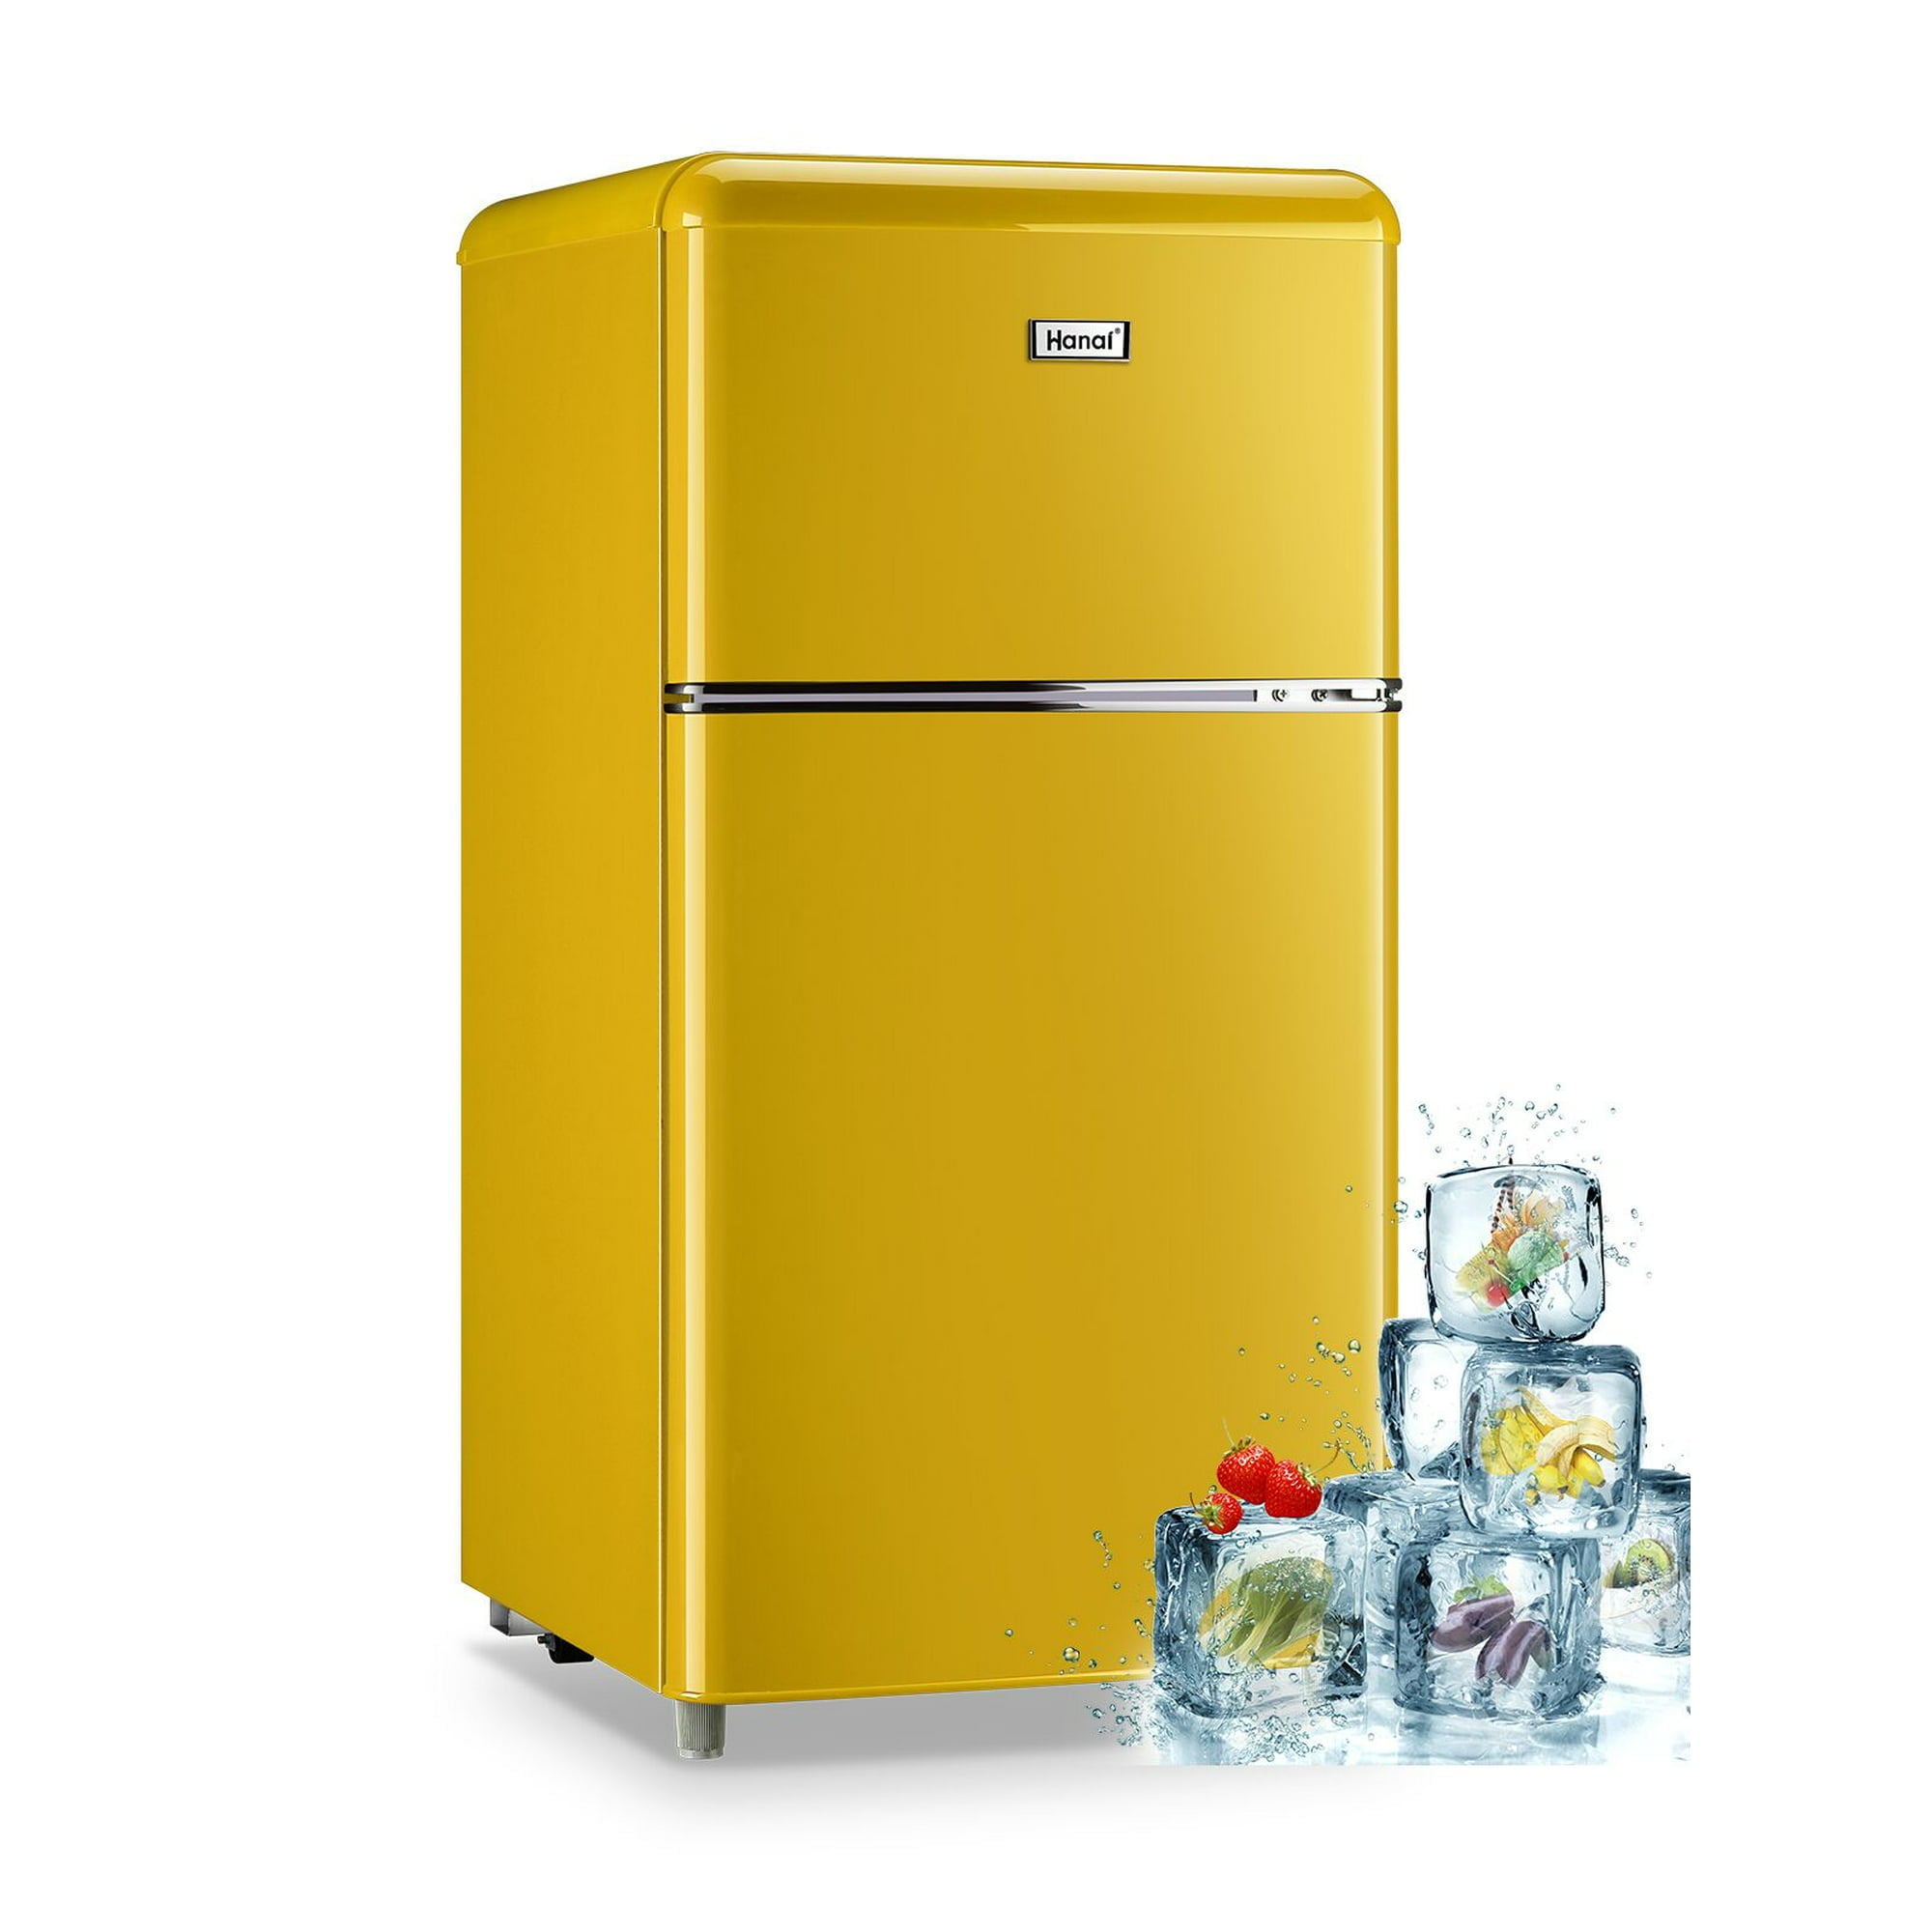 WANAI Compact Refrigerator - 2 Doors Small Refrigerator with Removable and  Adjustable Shelves, Low Noise, Retro Mini fridge with Freezer for Bedroom,  Drom, Apartment, Garage, Office , 3.2 Cu.Ft 